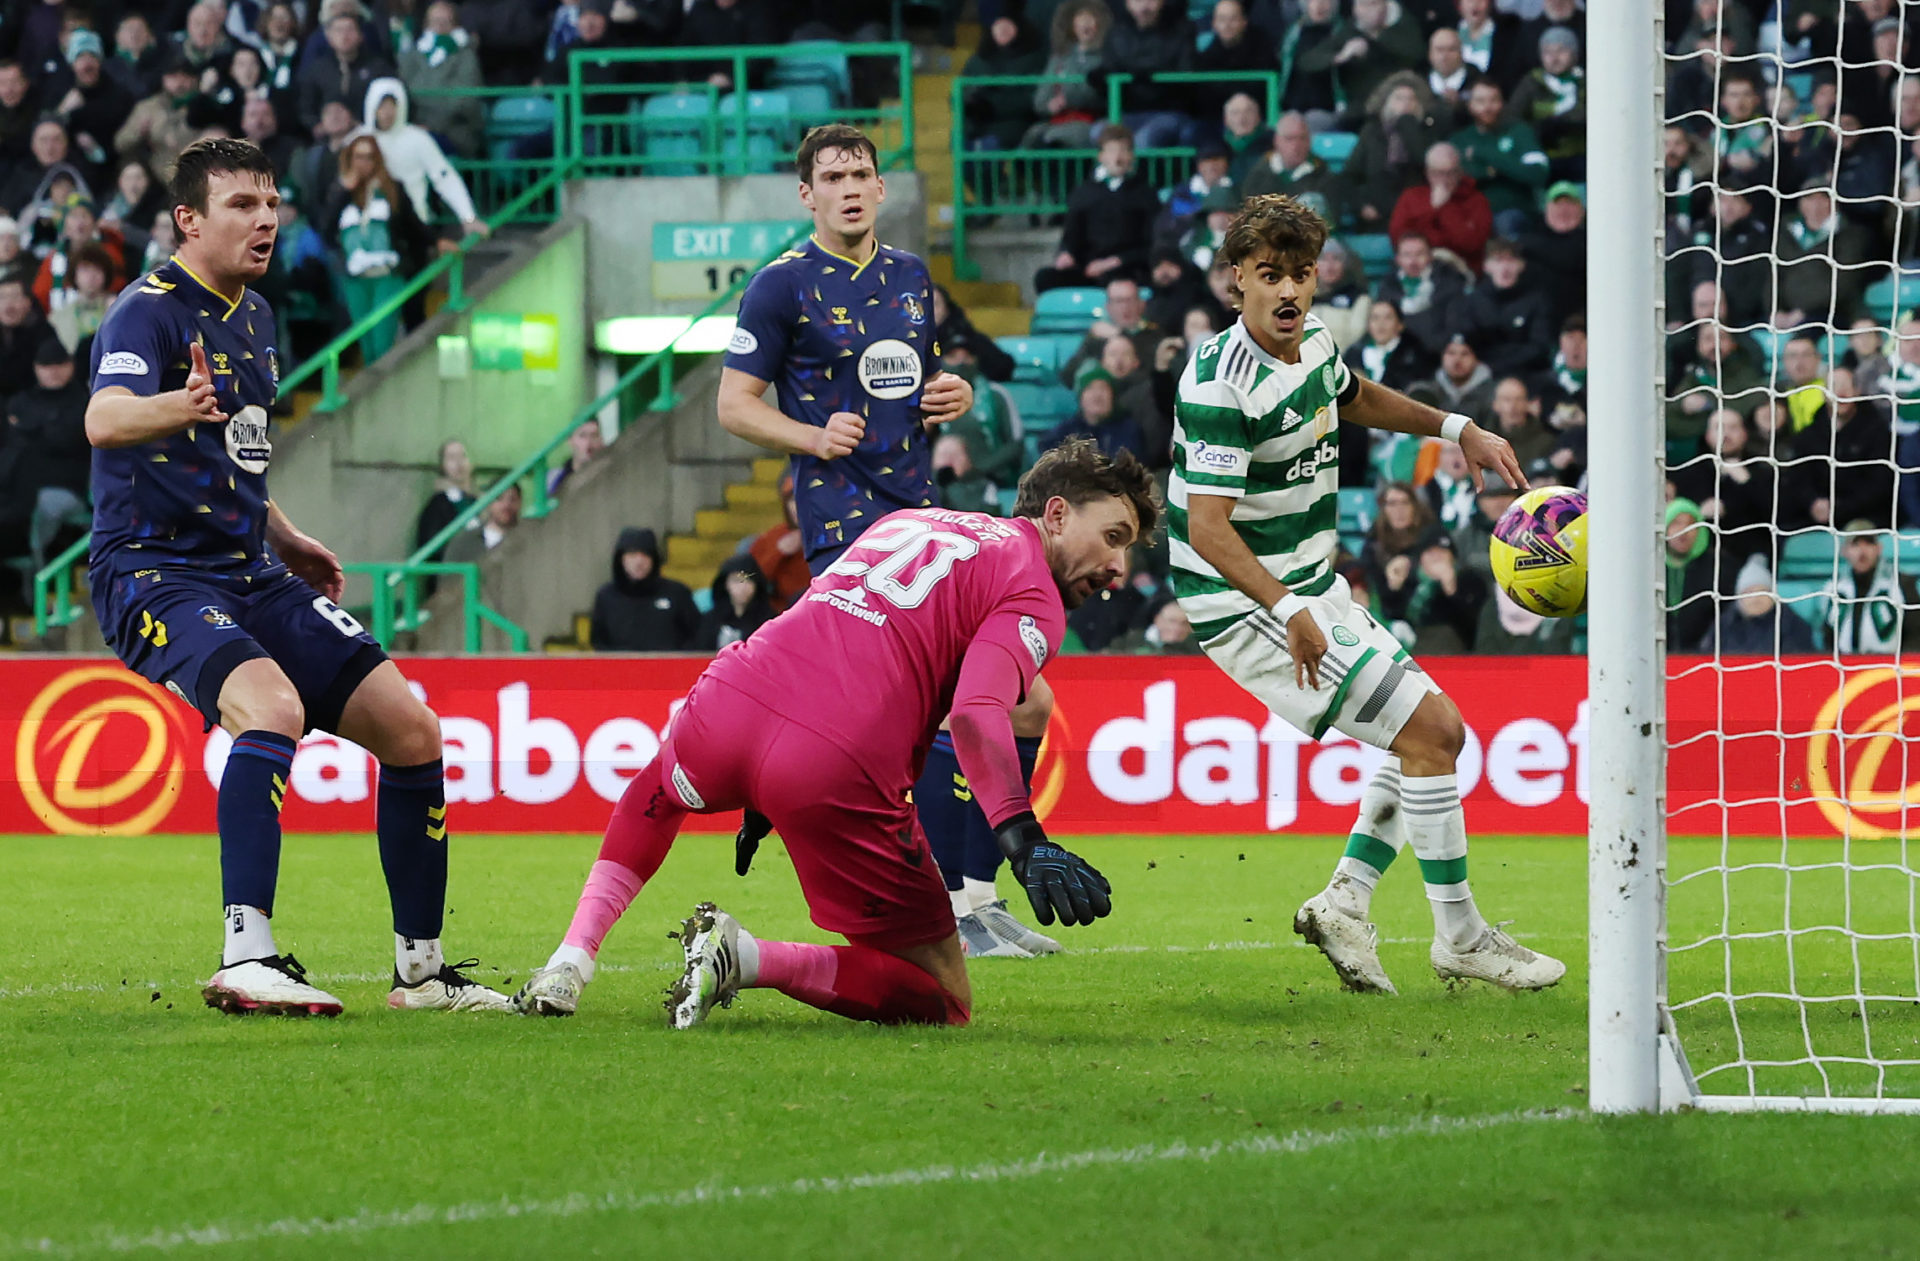 Celtic have only dropped five points so far this season